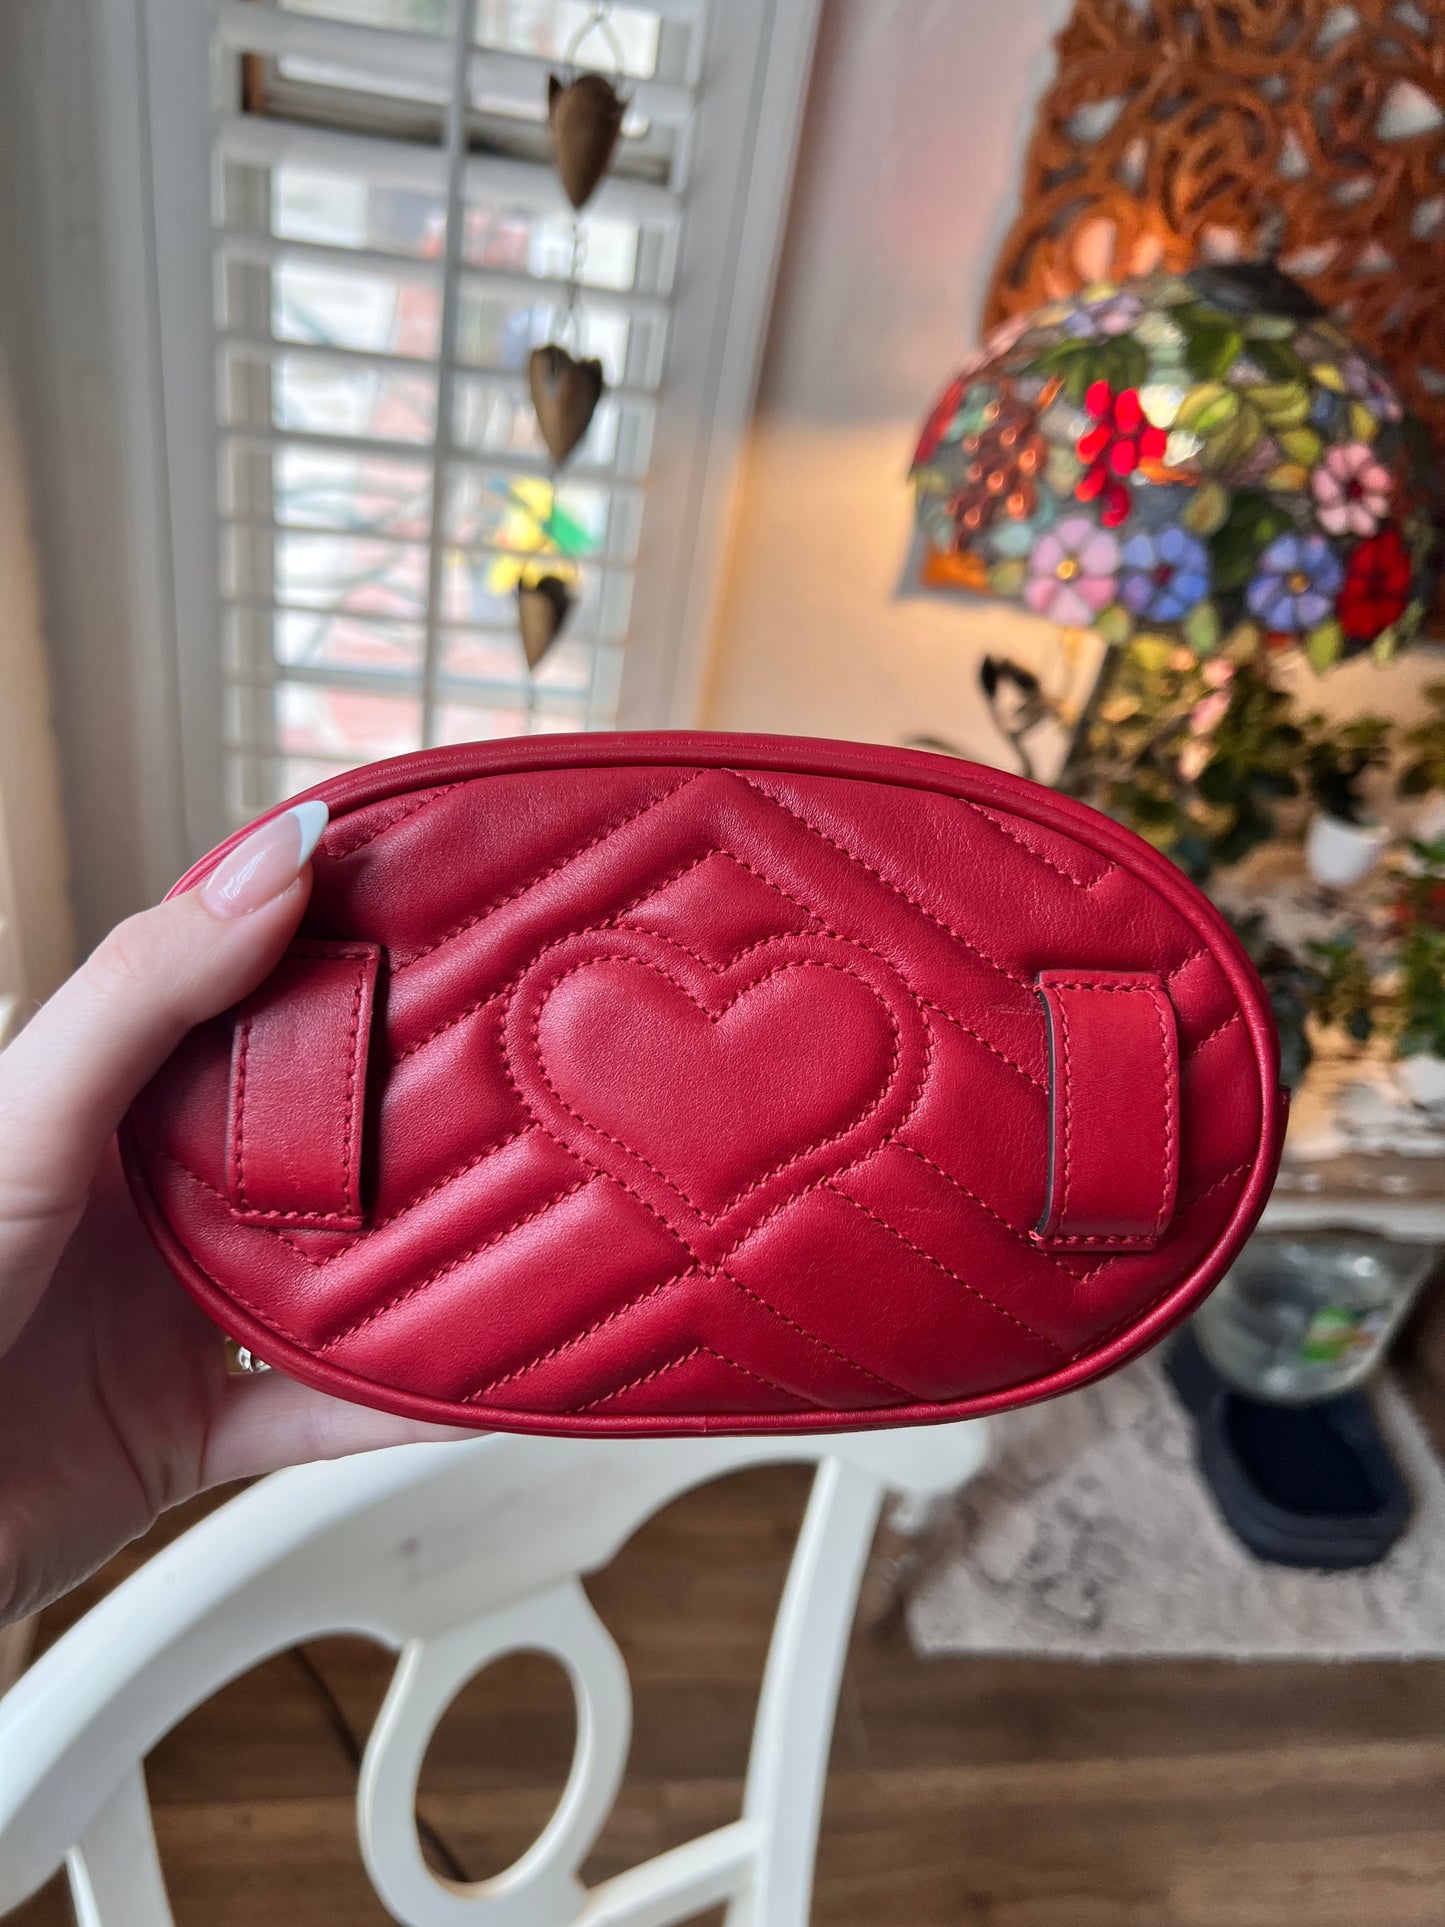 GUCCI Calfskin Matelasse GG Marmont Belt Bag size 65 or 26 in Hibiscus Red